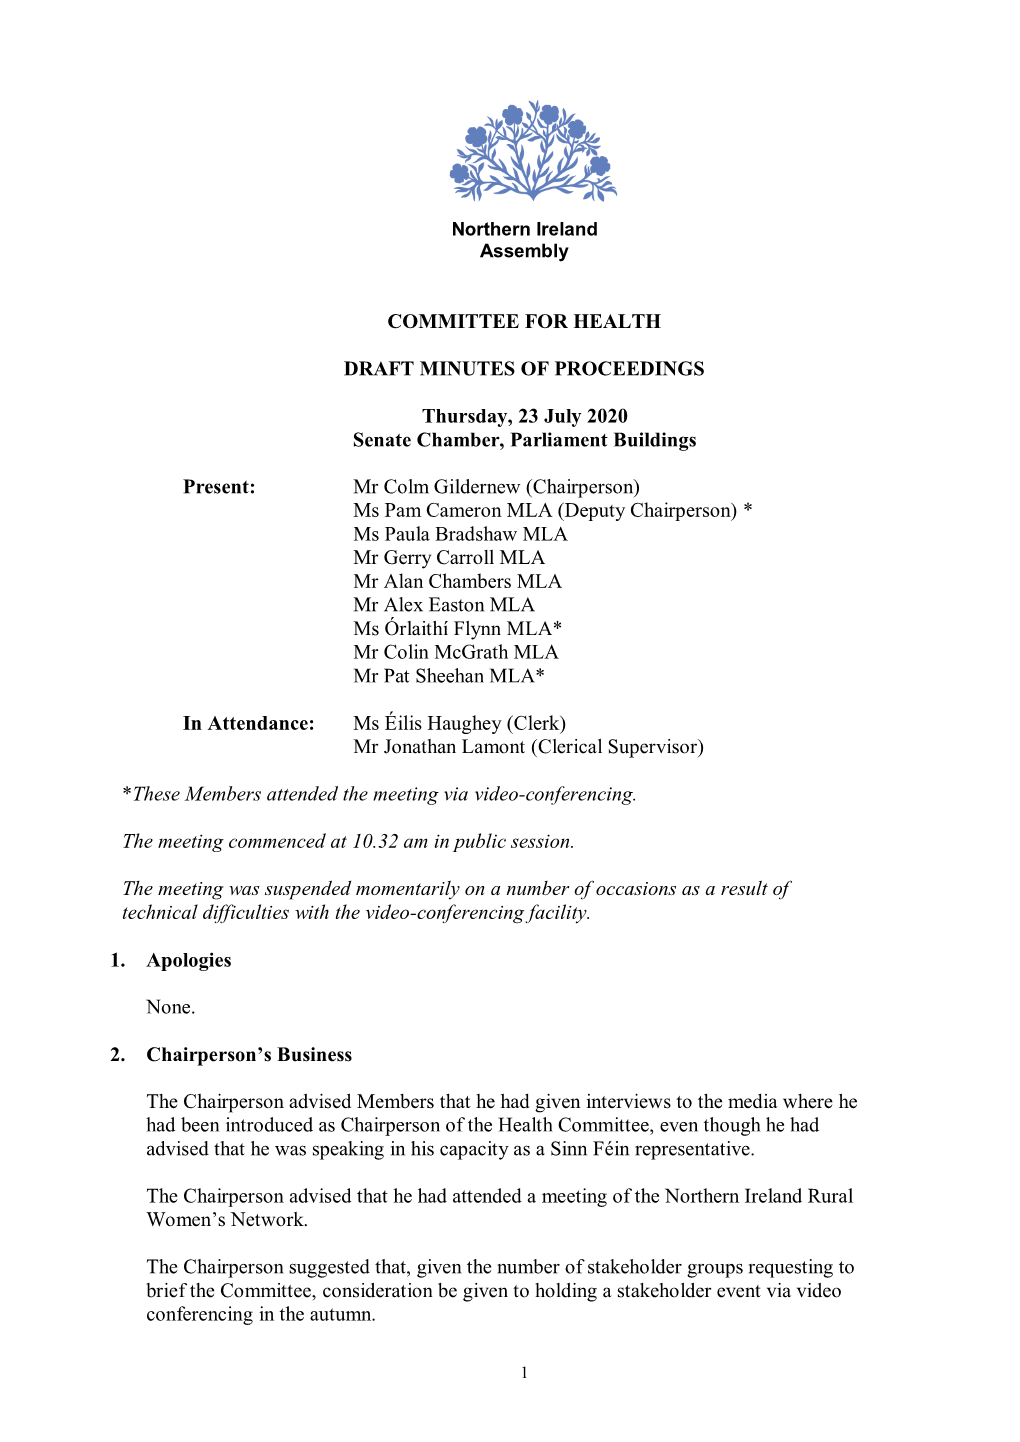 Committee for Health Minutes of Proceedings 23 July 2020